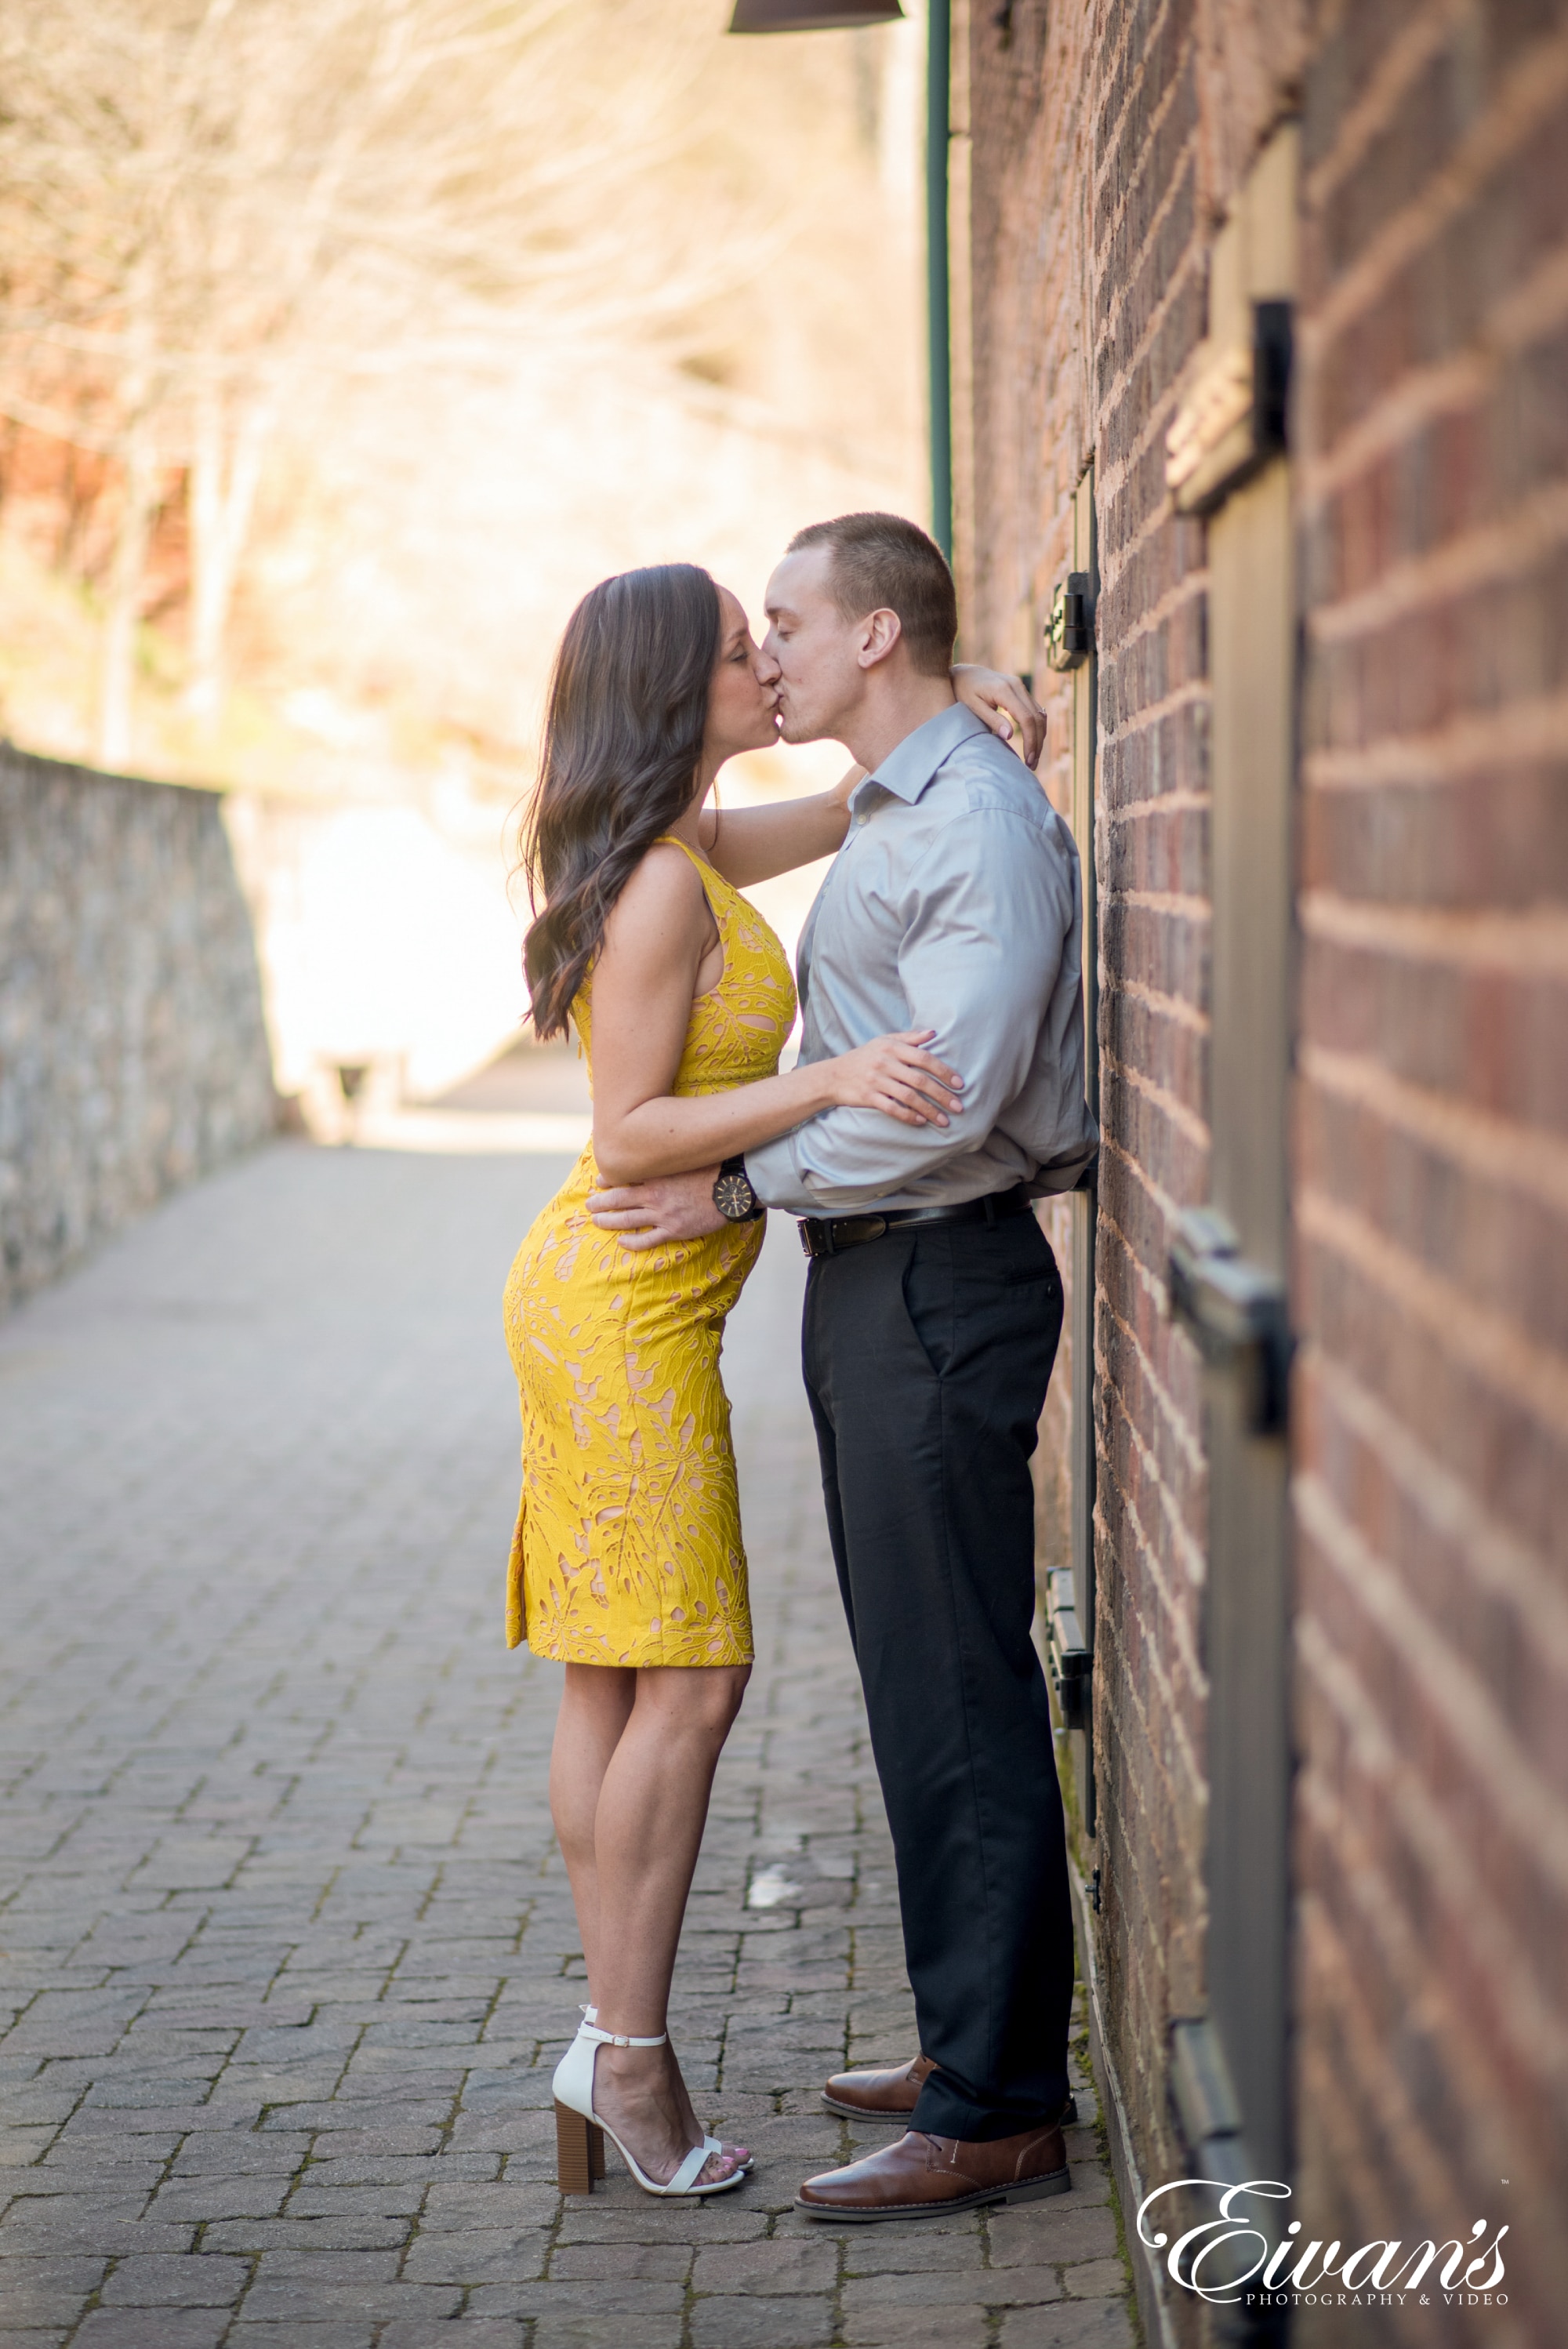 man and woman kissing beside brick wall during daytime